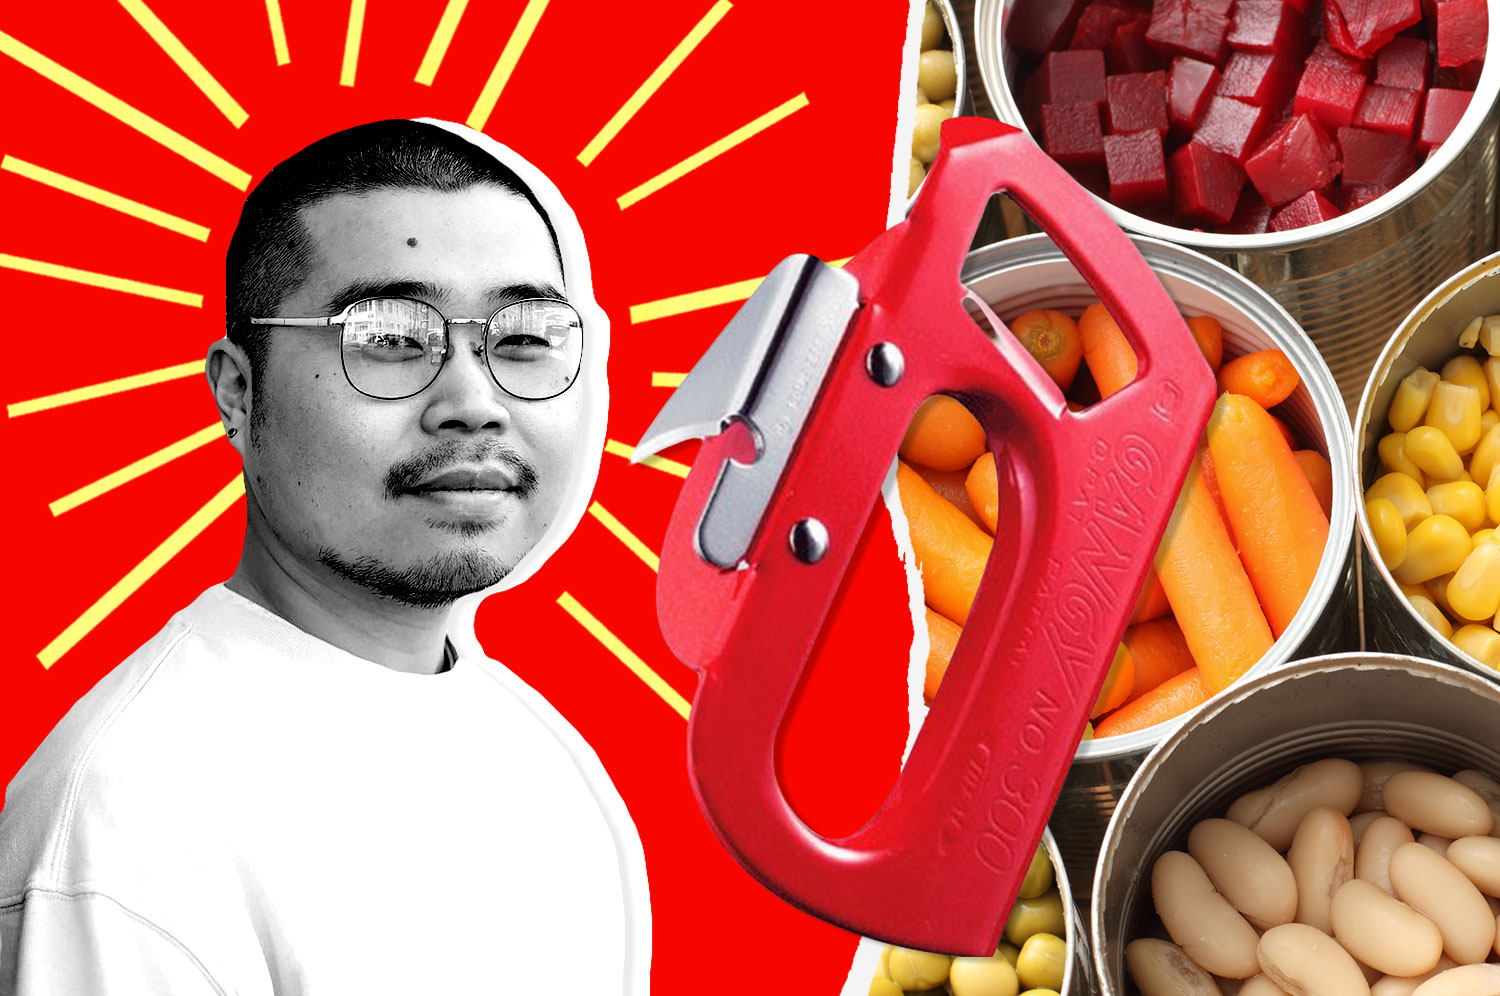 A photo illustration with a portrait of Max Boonthanakit, a japanese can opener, and baskets of vegetables 